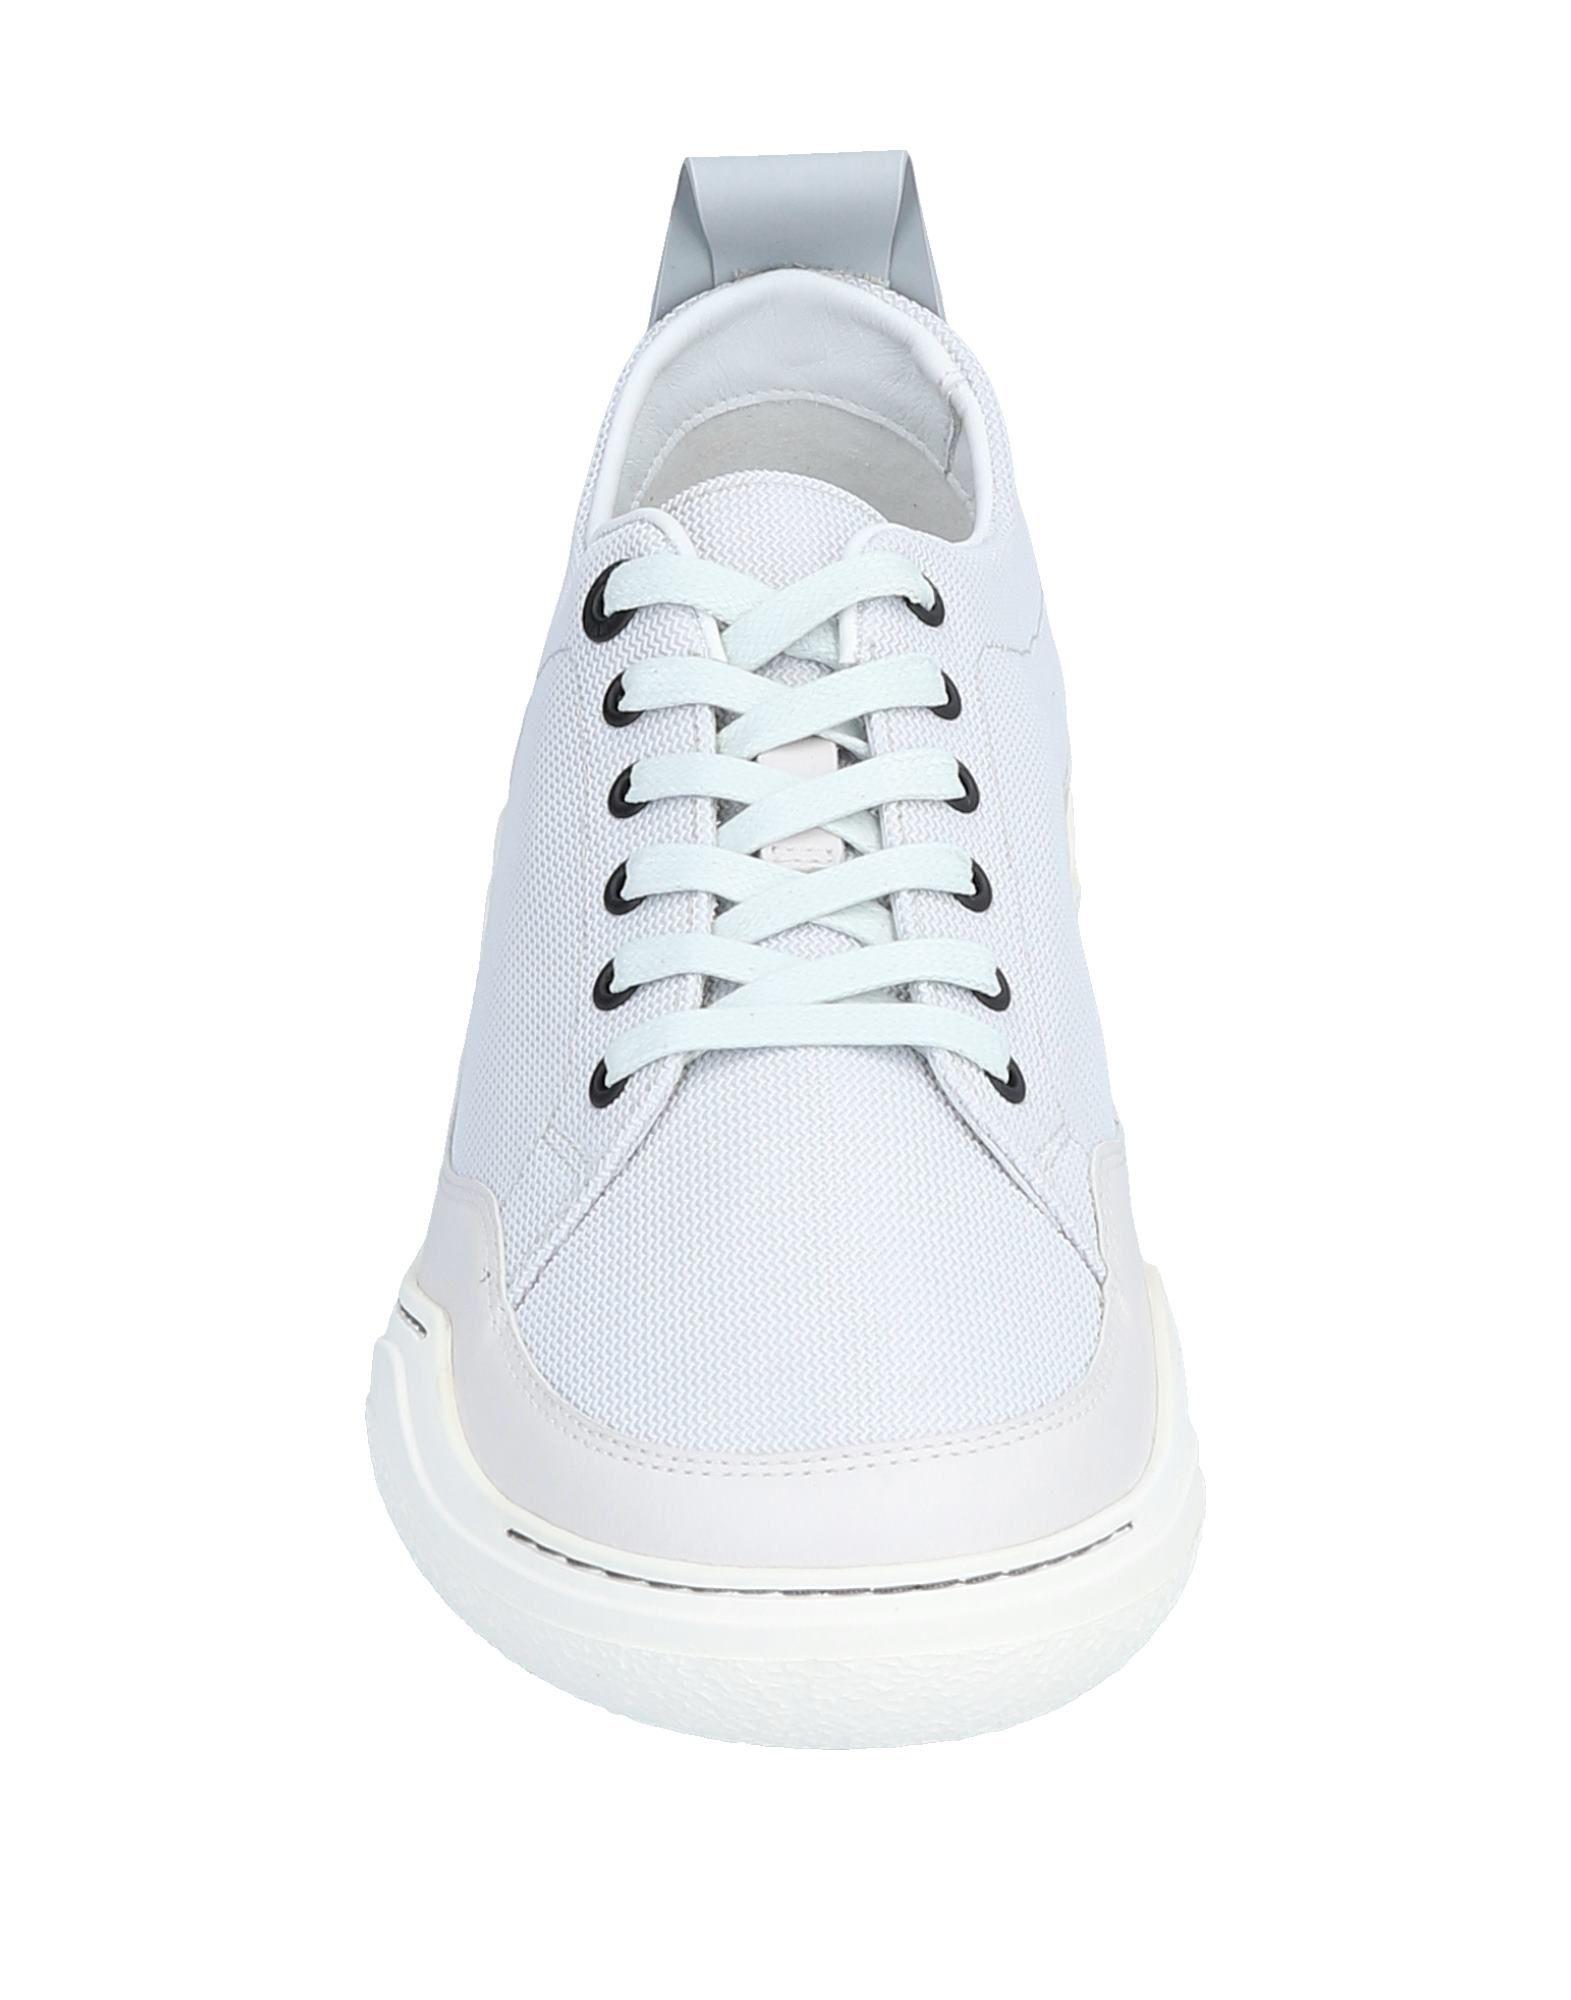 Lanvin Leather Low-tops & Sneakers in Light Grey (Gray) for Men - Lyst